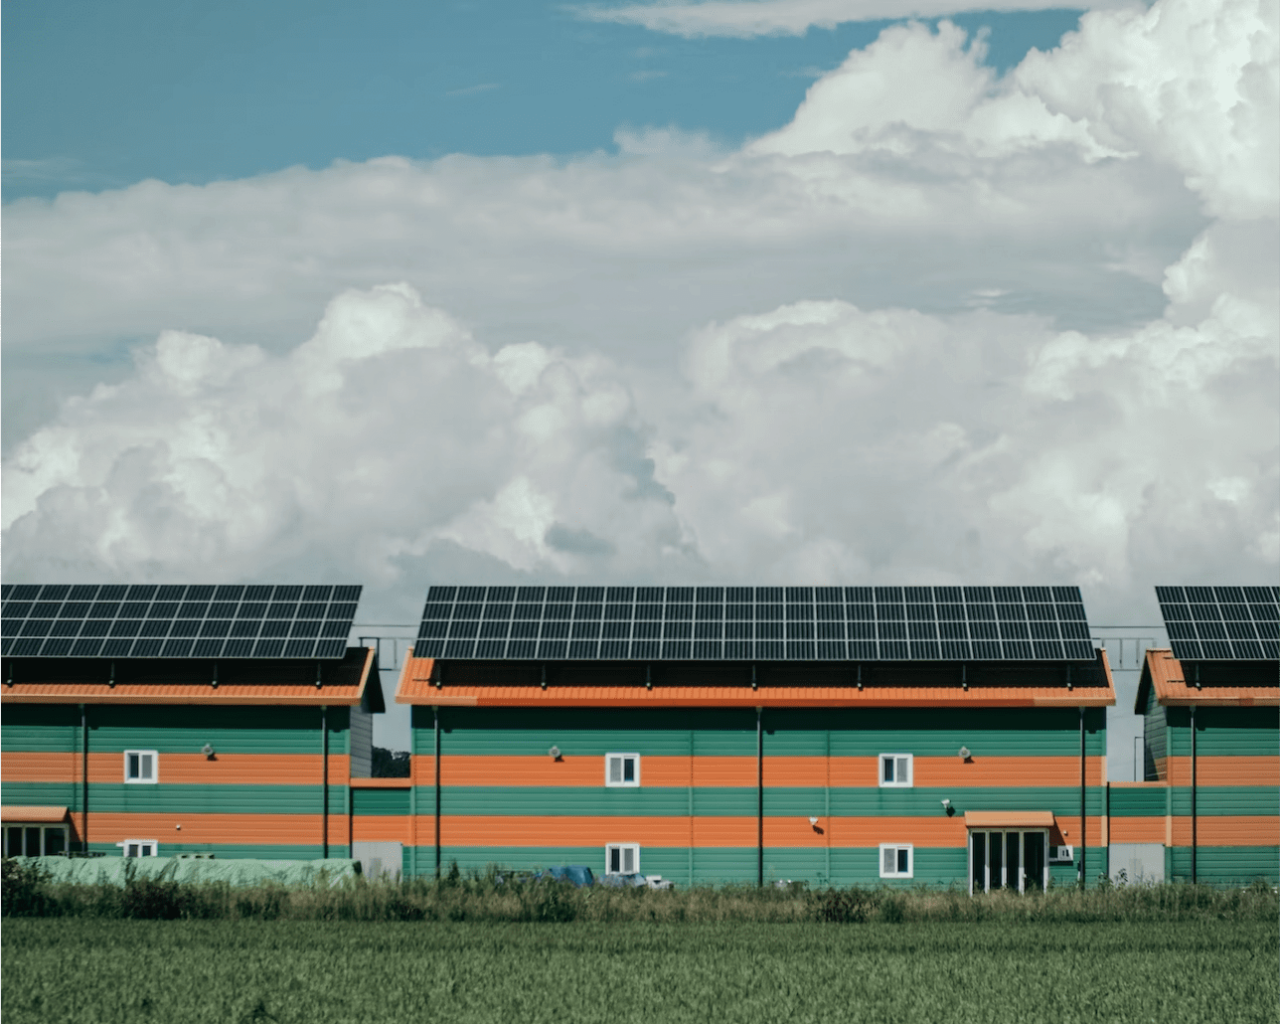 Commercial buildings with green and orange stripes with solar panels on their roof tops